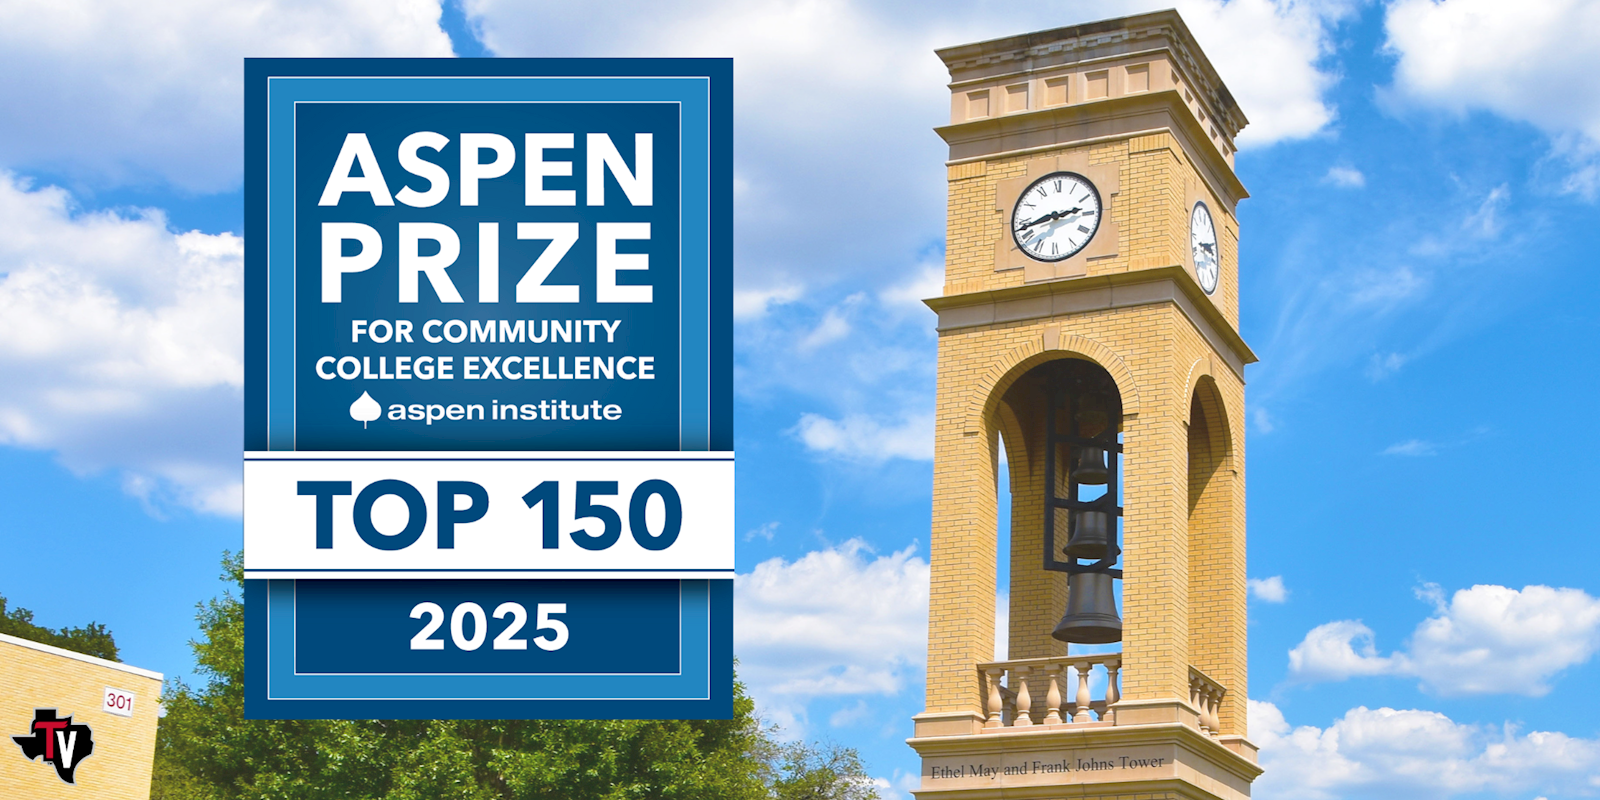 The Aspen Institute names Trinity Valley Community College one of the 150 Community Colleges Eligible for the $1 Million 2025 Aspen Prize   